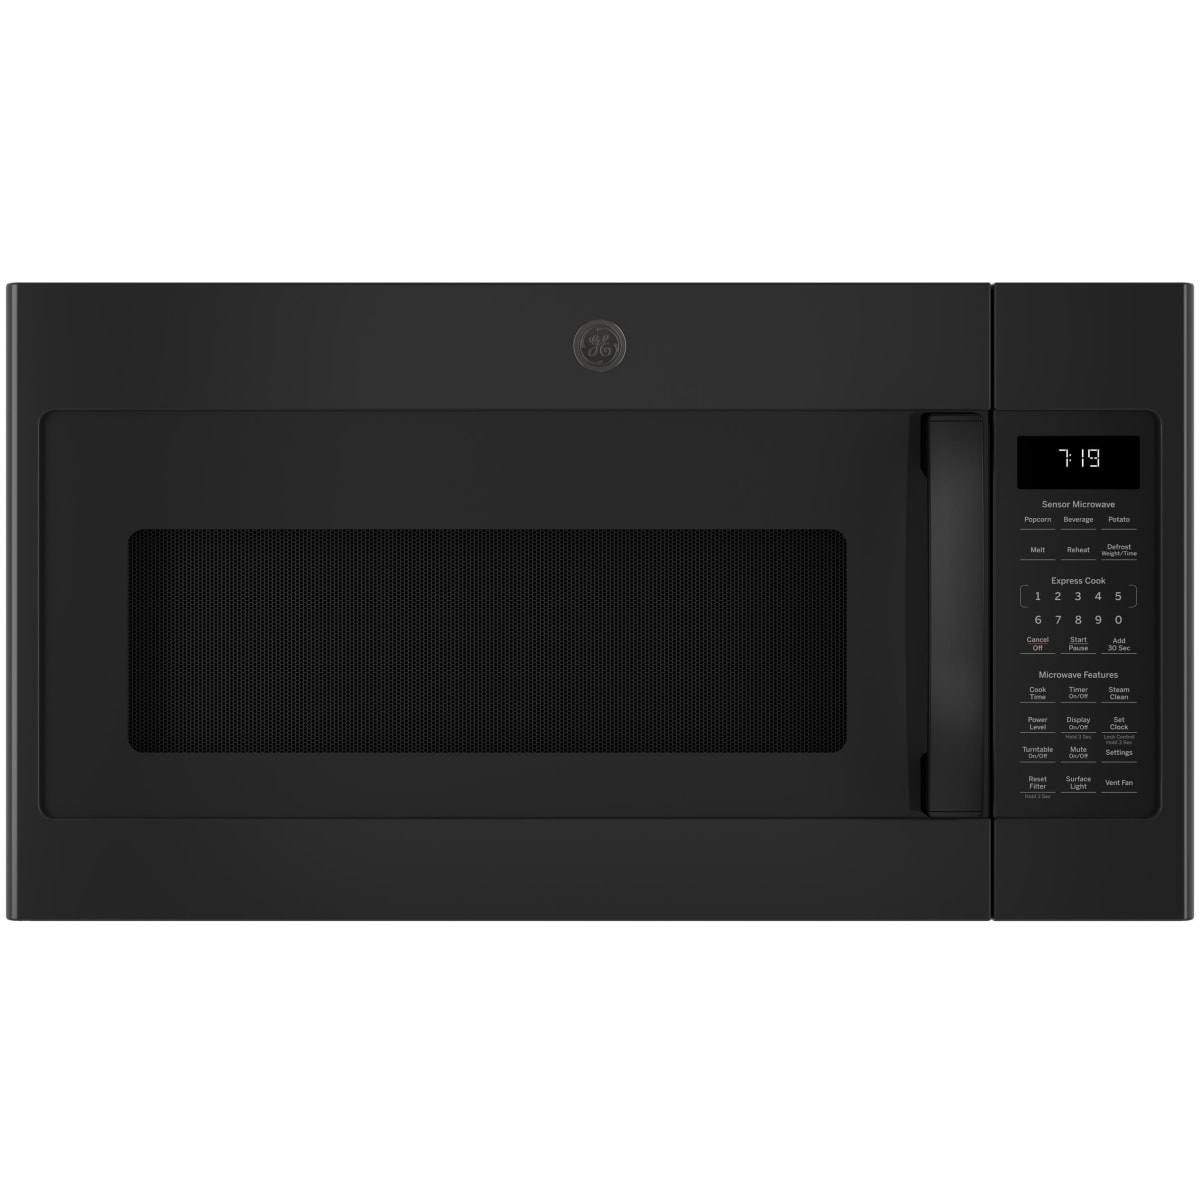 Our New Microwave